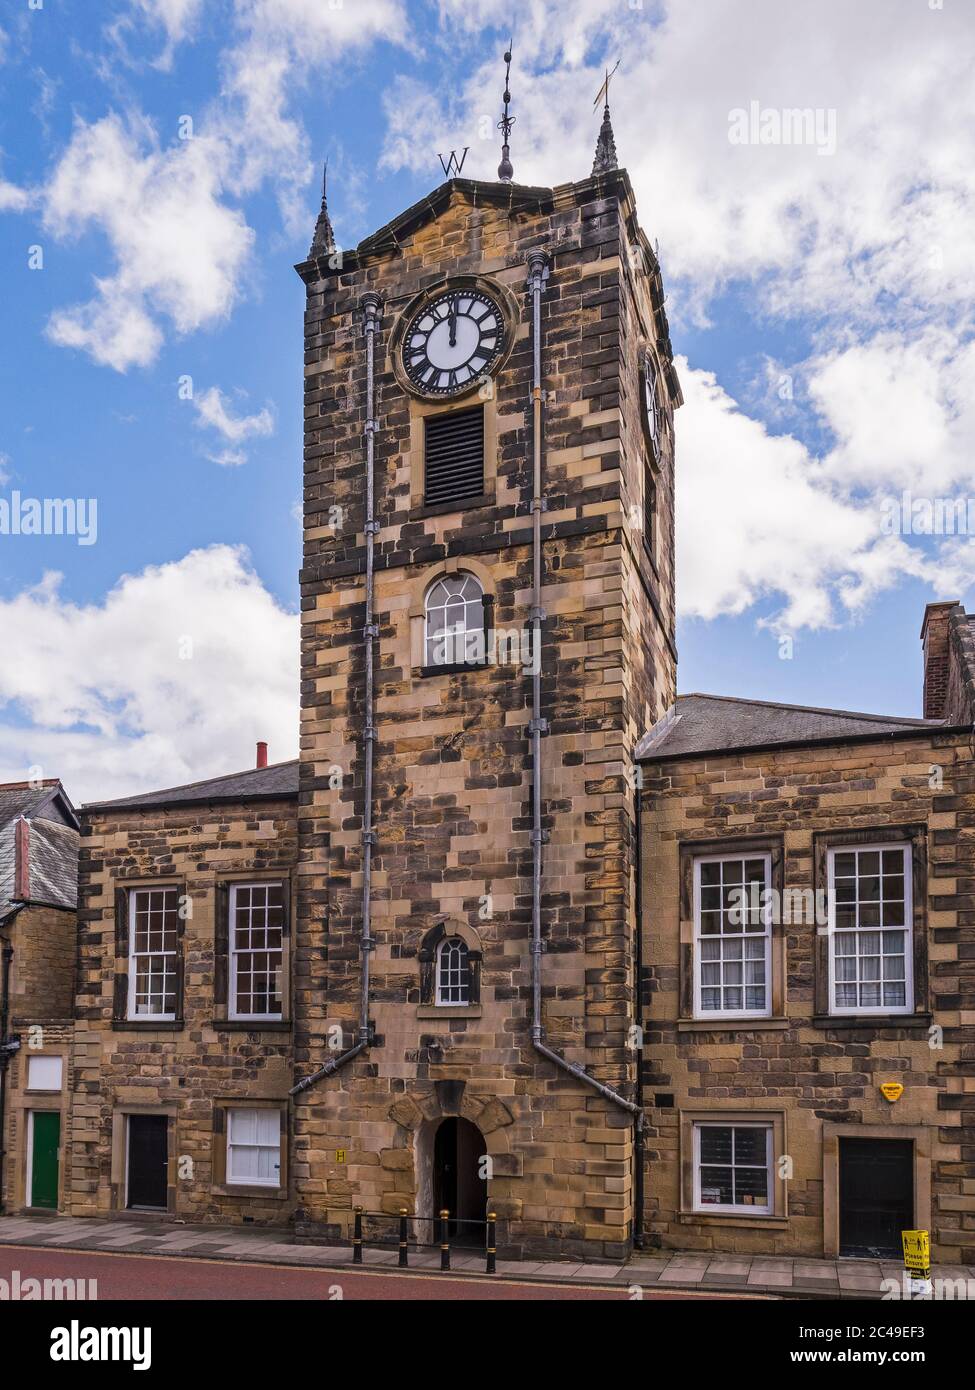 Town Hall at Alnwick, Northumberland, UK with clock tower Stock Photo